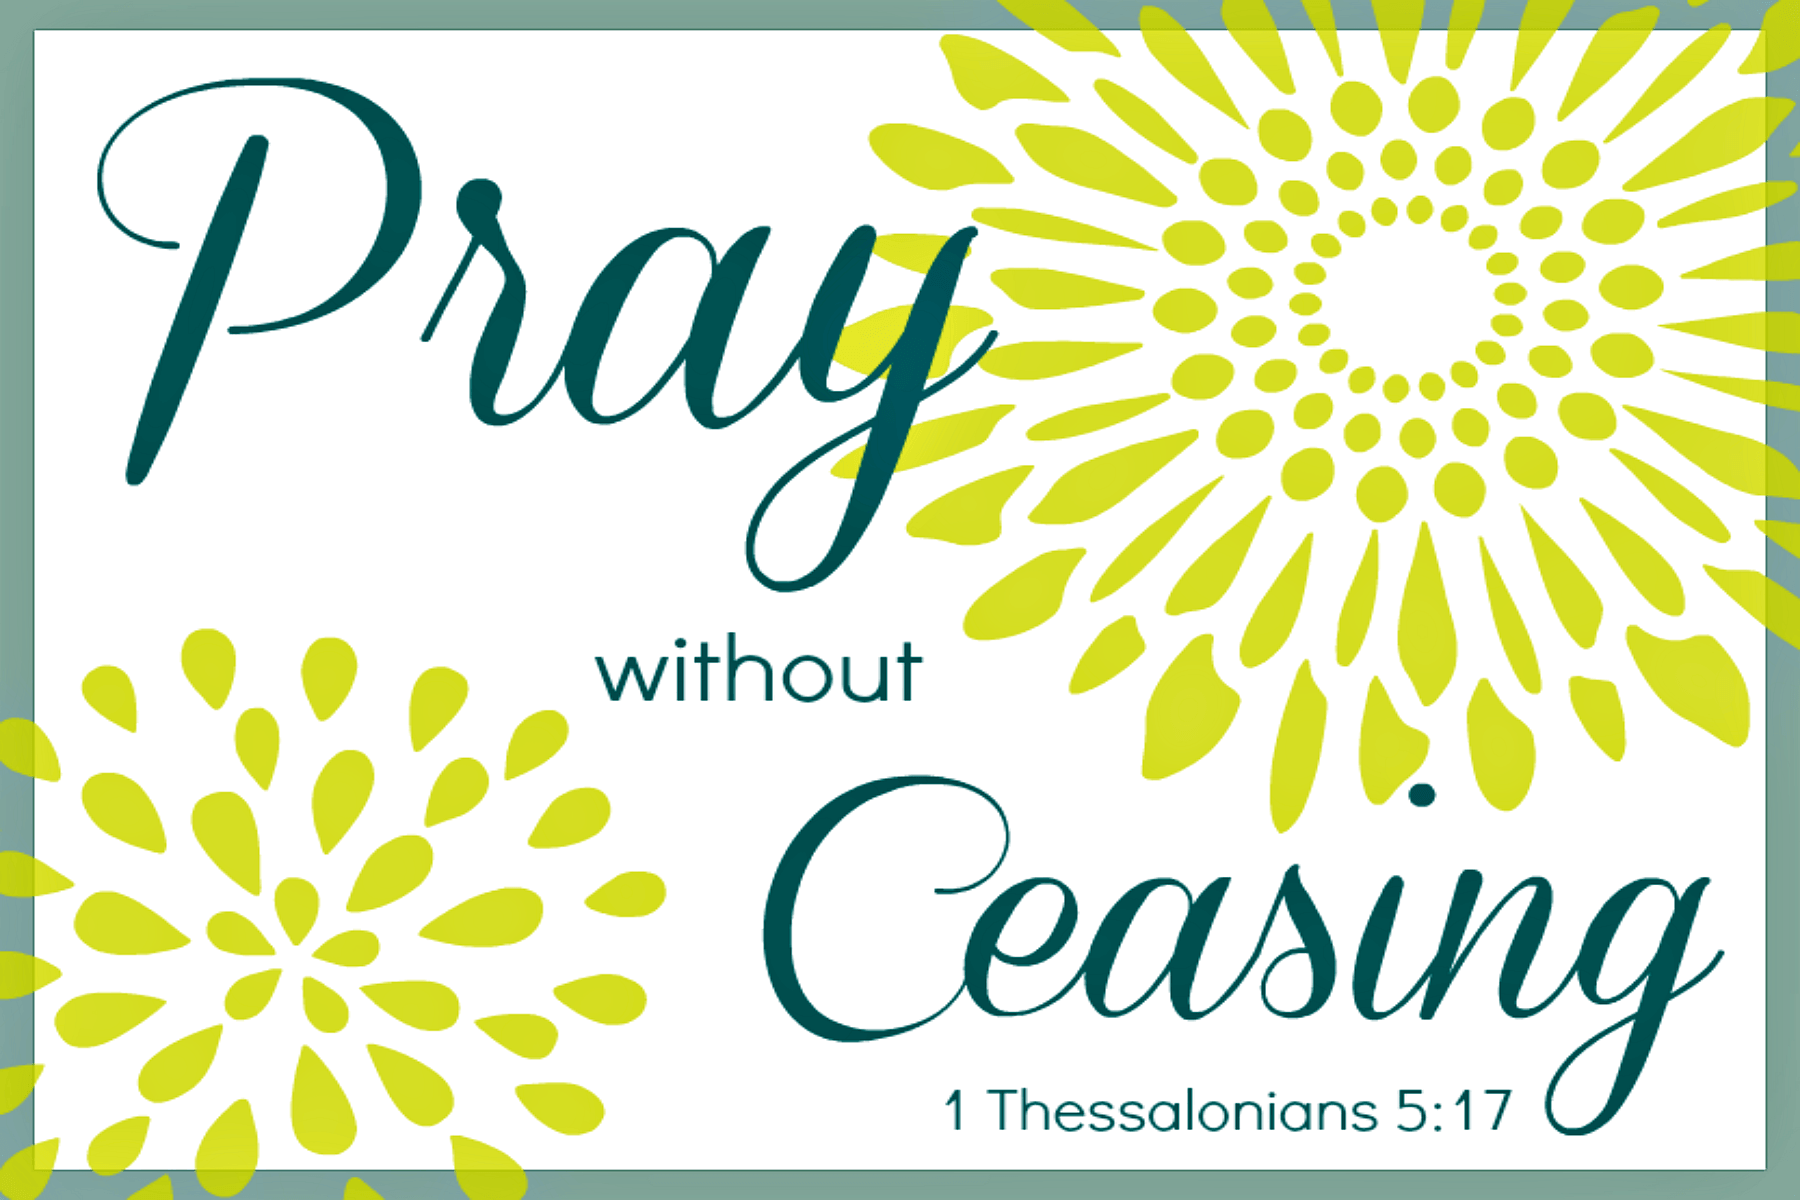 Pray-without-ceasing-4x6